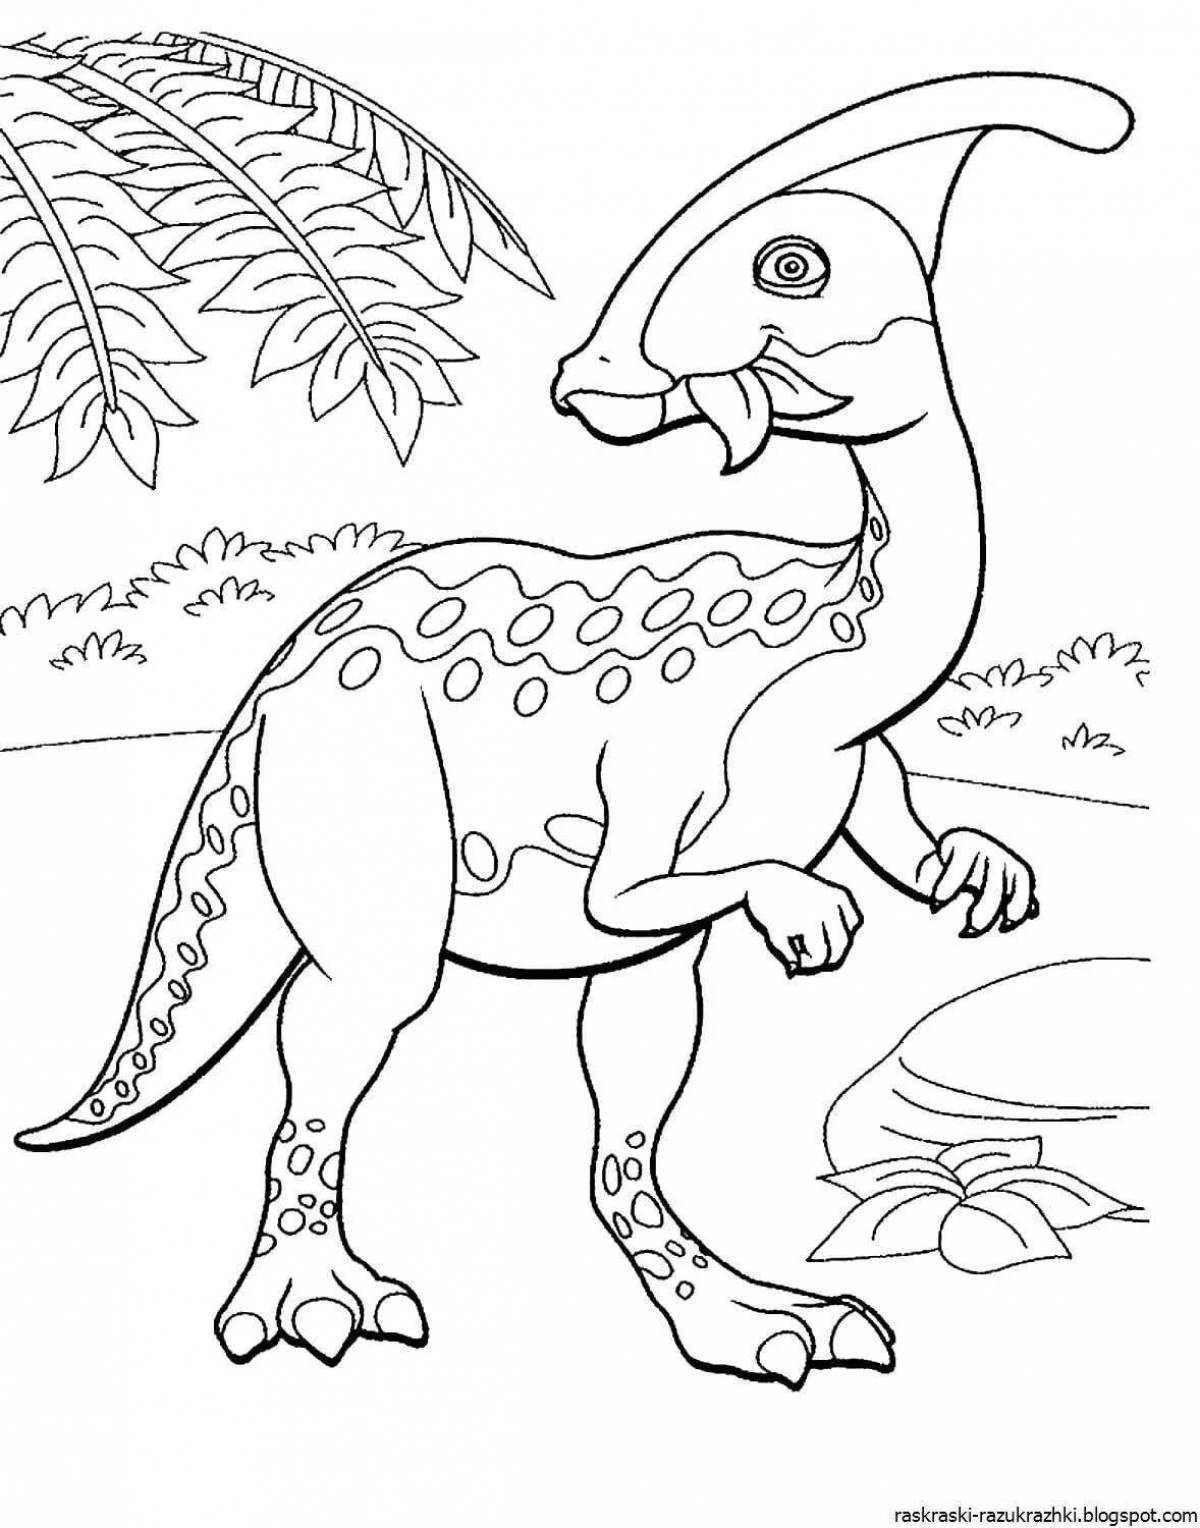 Colorful dinosaur coloring book for kids